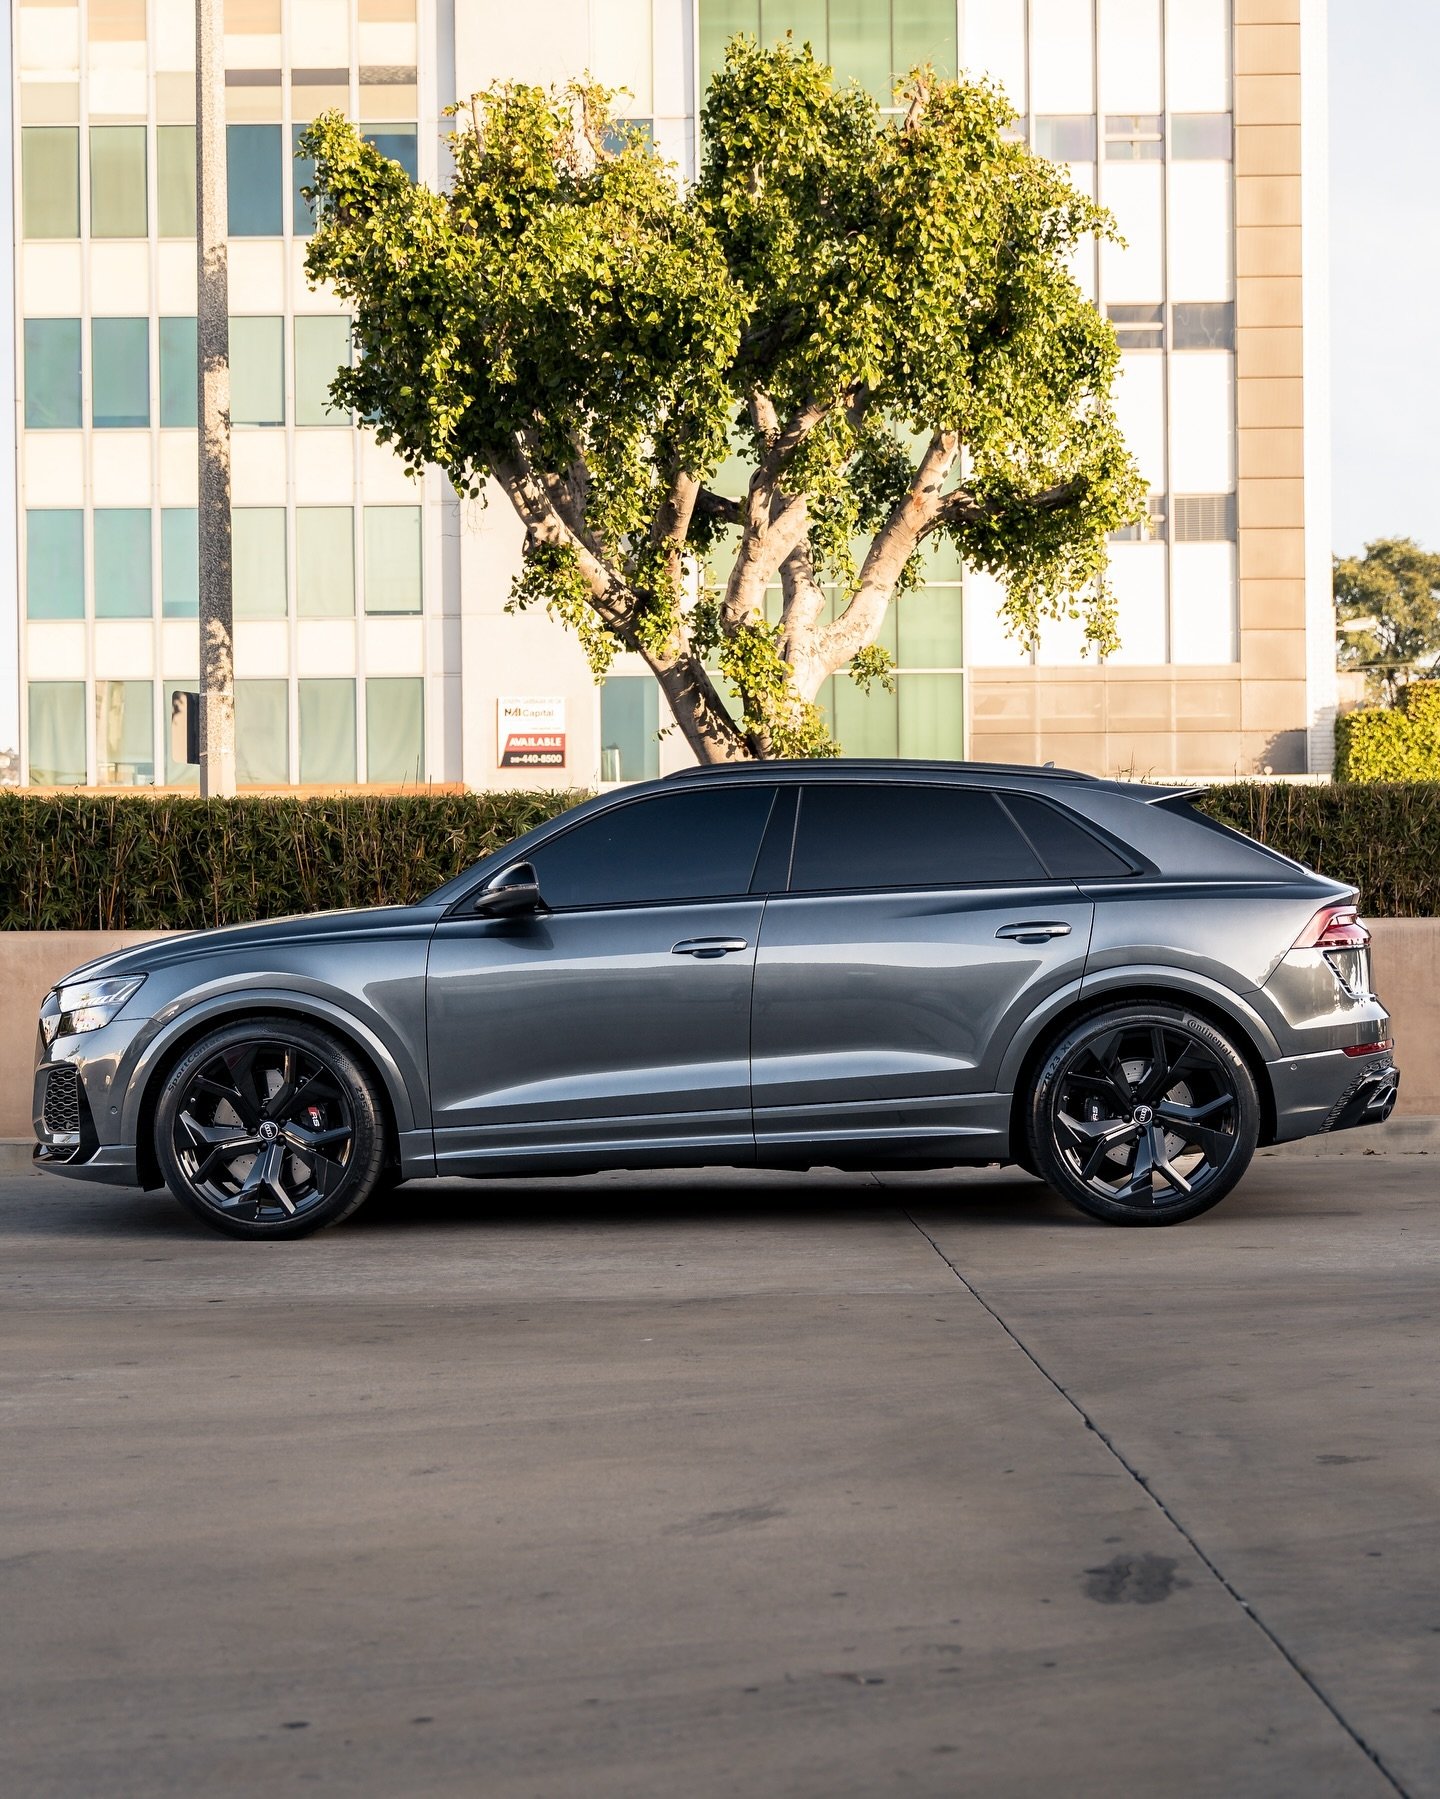 Don&rsquo;t buy a Urus, save a ton and get the RSQ8 🔥

▪️▪️▪️▪️▪️▪️▪️▪️▪️▪️▪️▪️▪️▪️▪️▪️▪️▪️ ▪️ ▪️ ▪️ ▪️
Located in Reseda, we offer 24/7 assistance with collision incidents, and some mobile services as well. Contact us today for your quote!

We serv